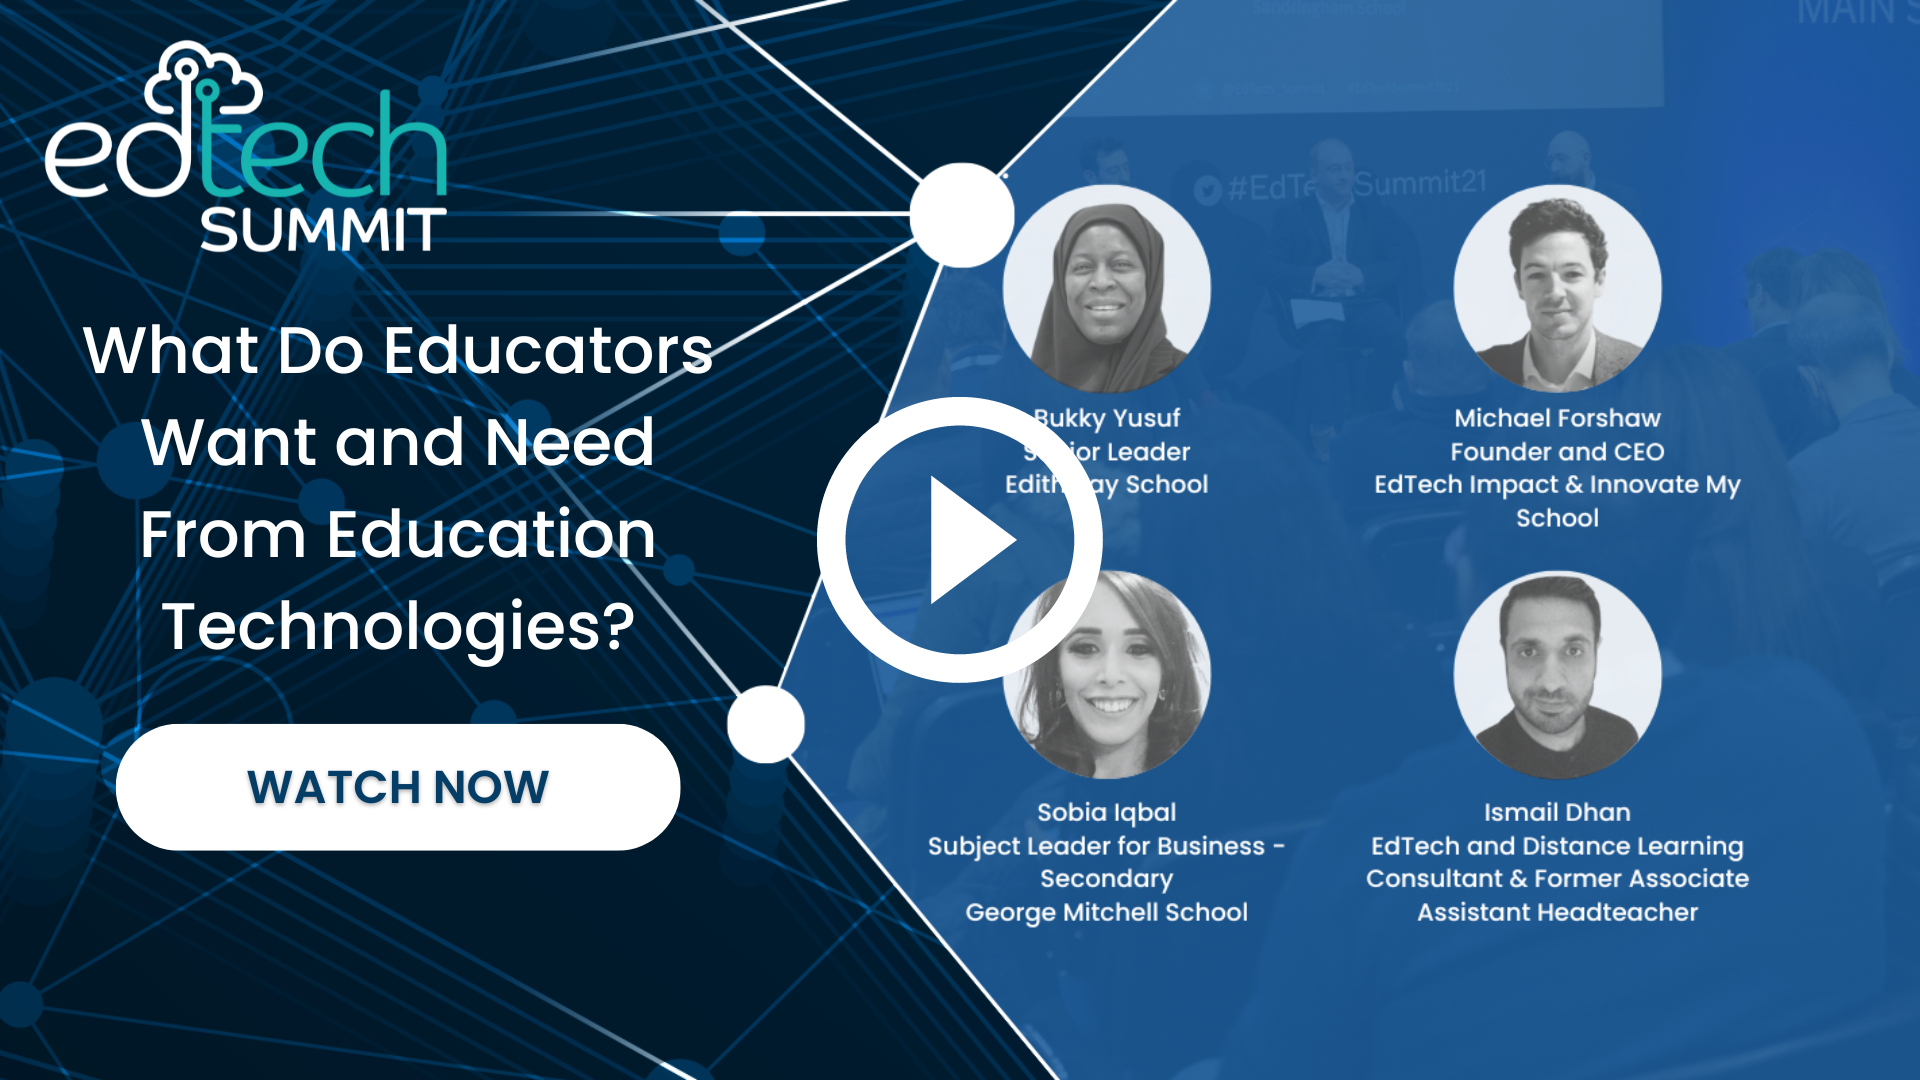 What Do Educators Want and Need From Education Technologies?